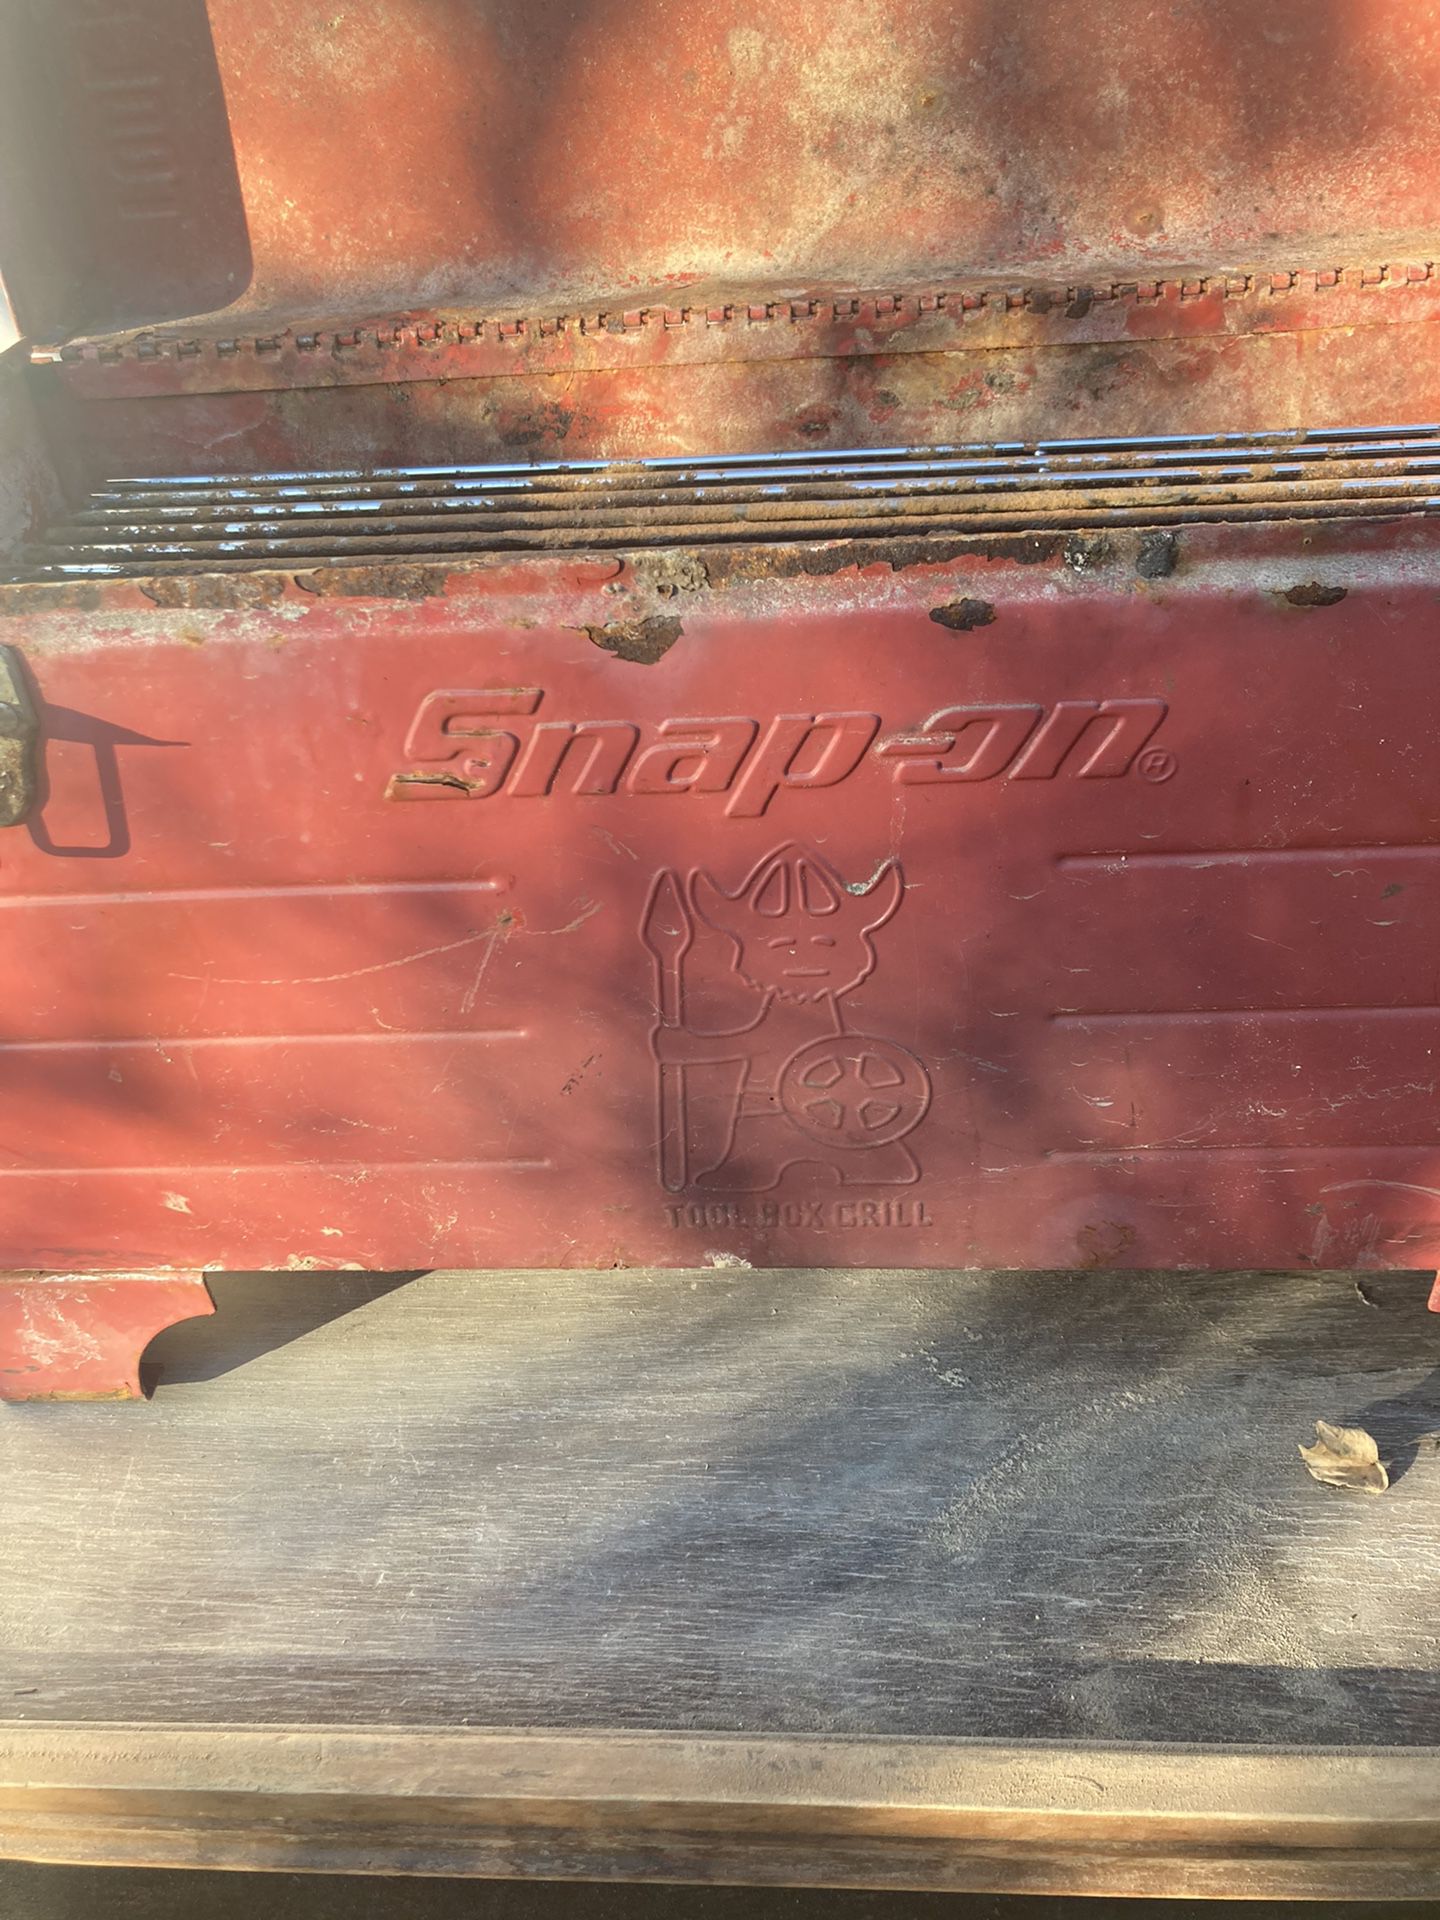 Snap on Tool Box grill Rare